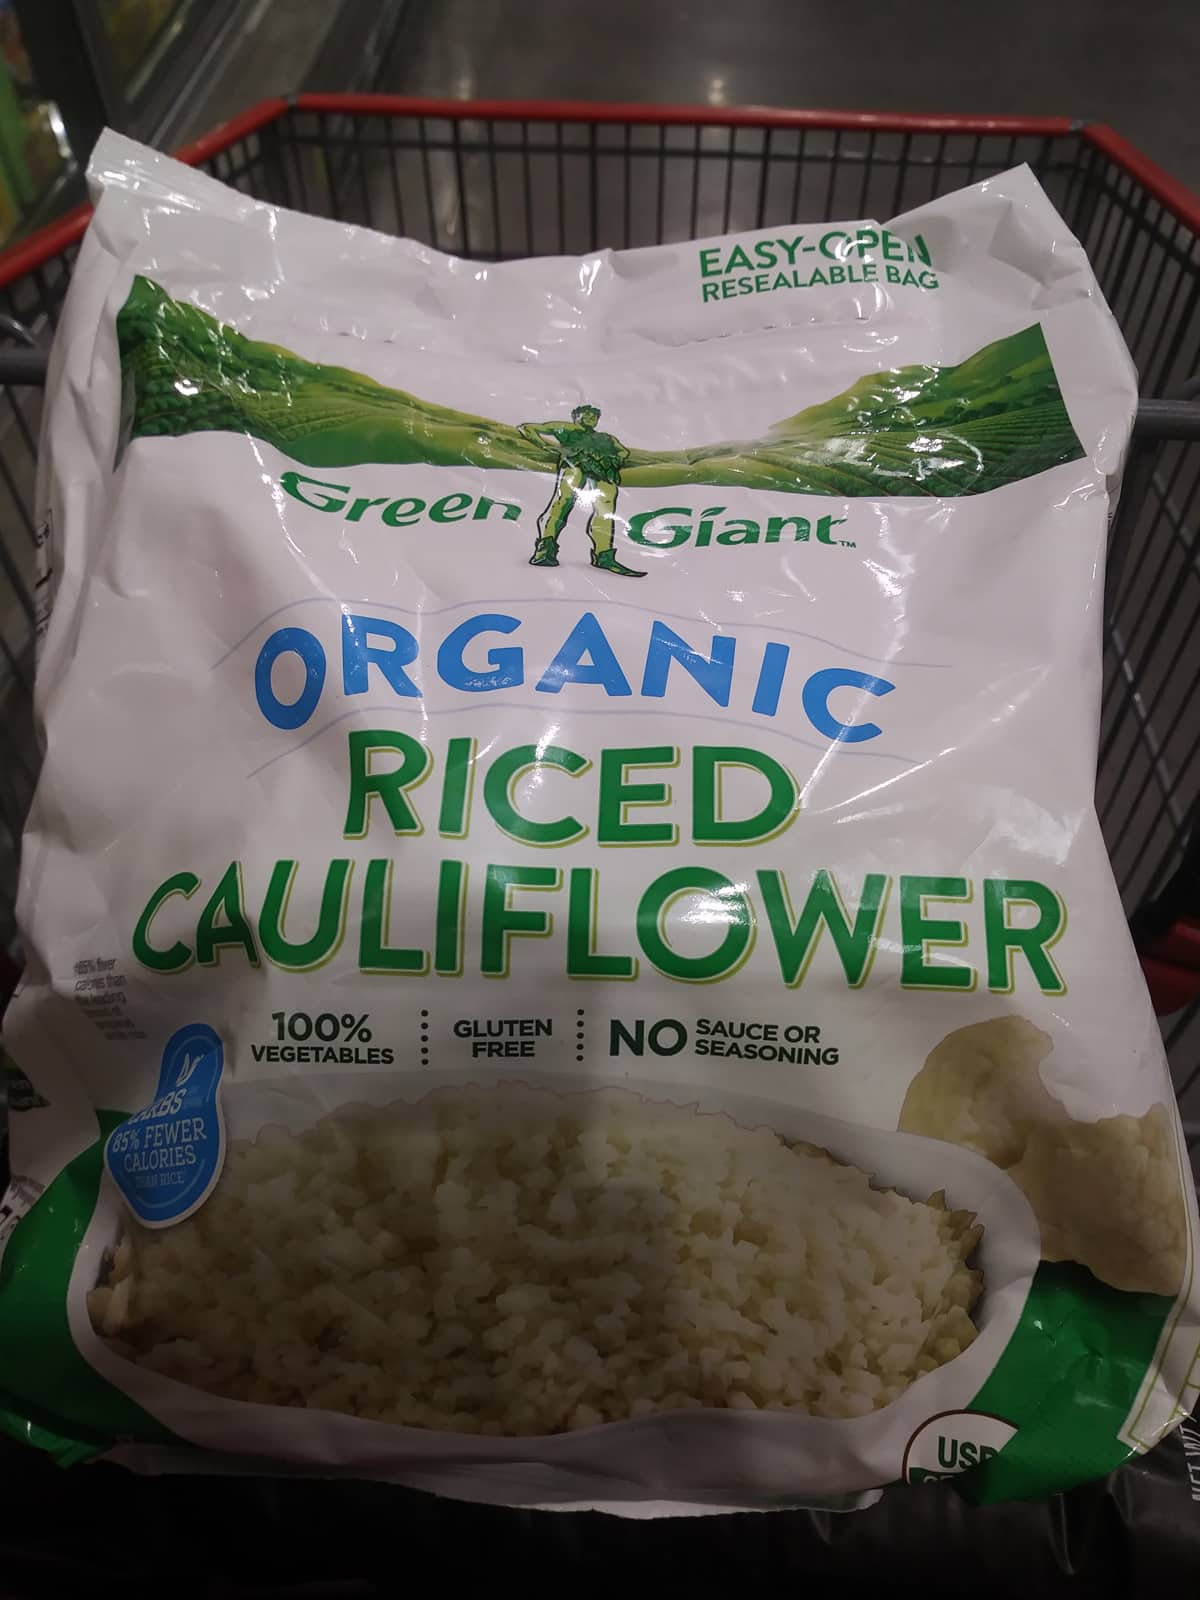 Costco Trendy Products to Buy - Cauliflower, Coconut | Kitchn